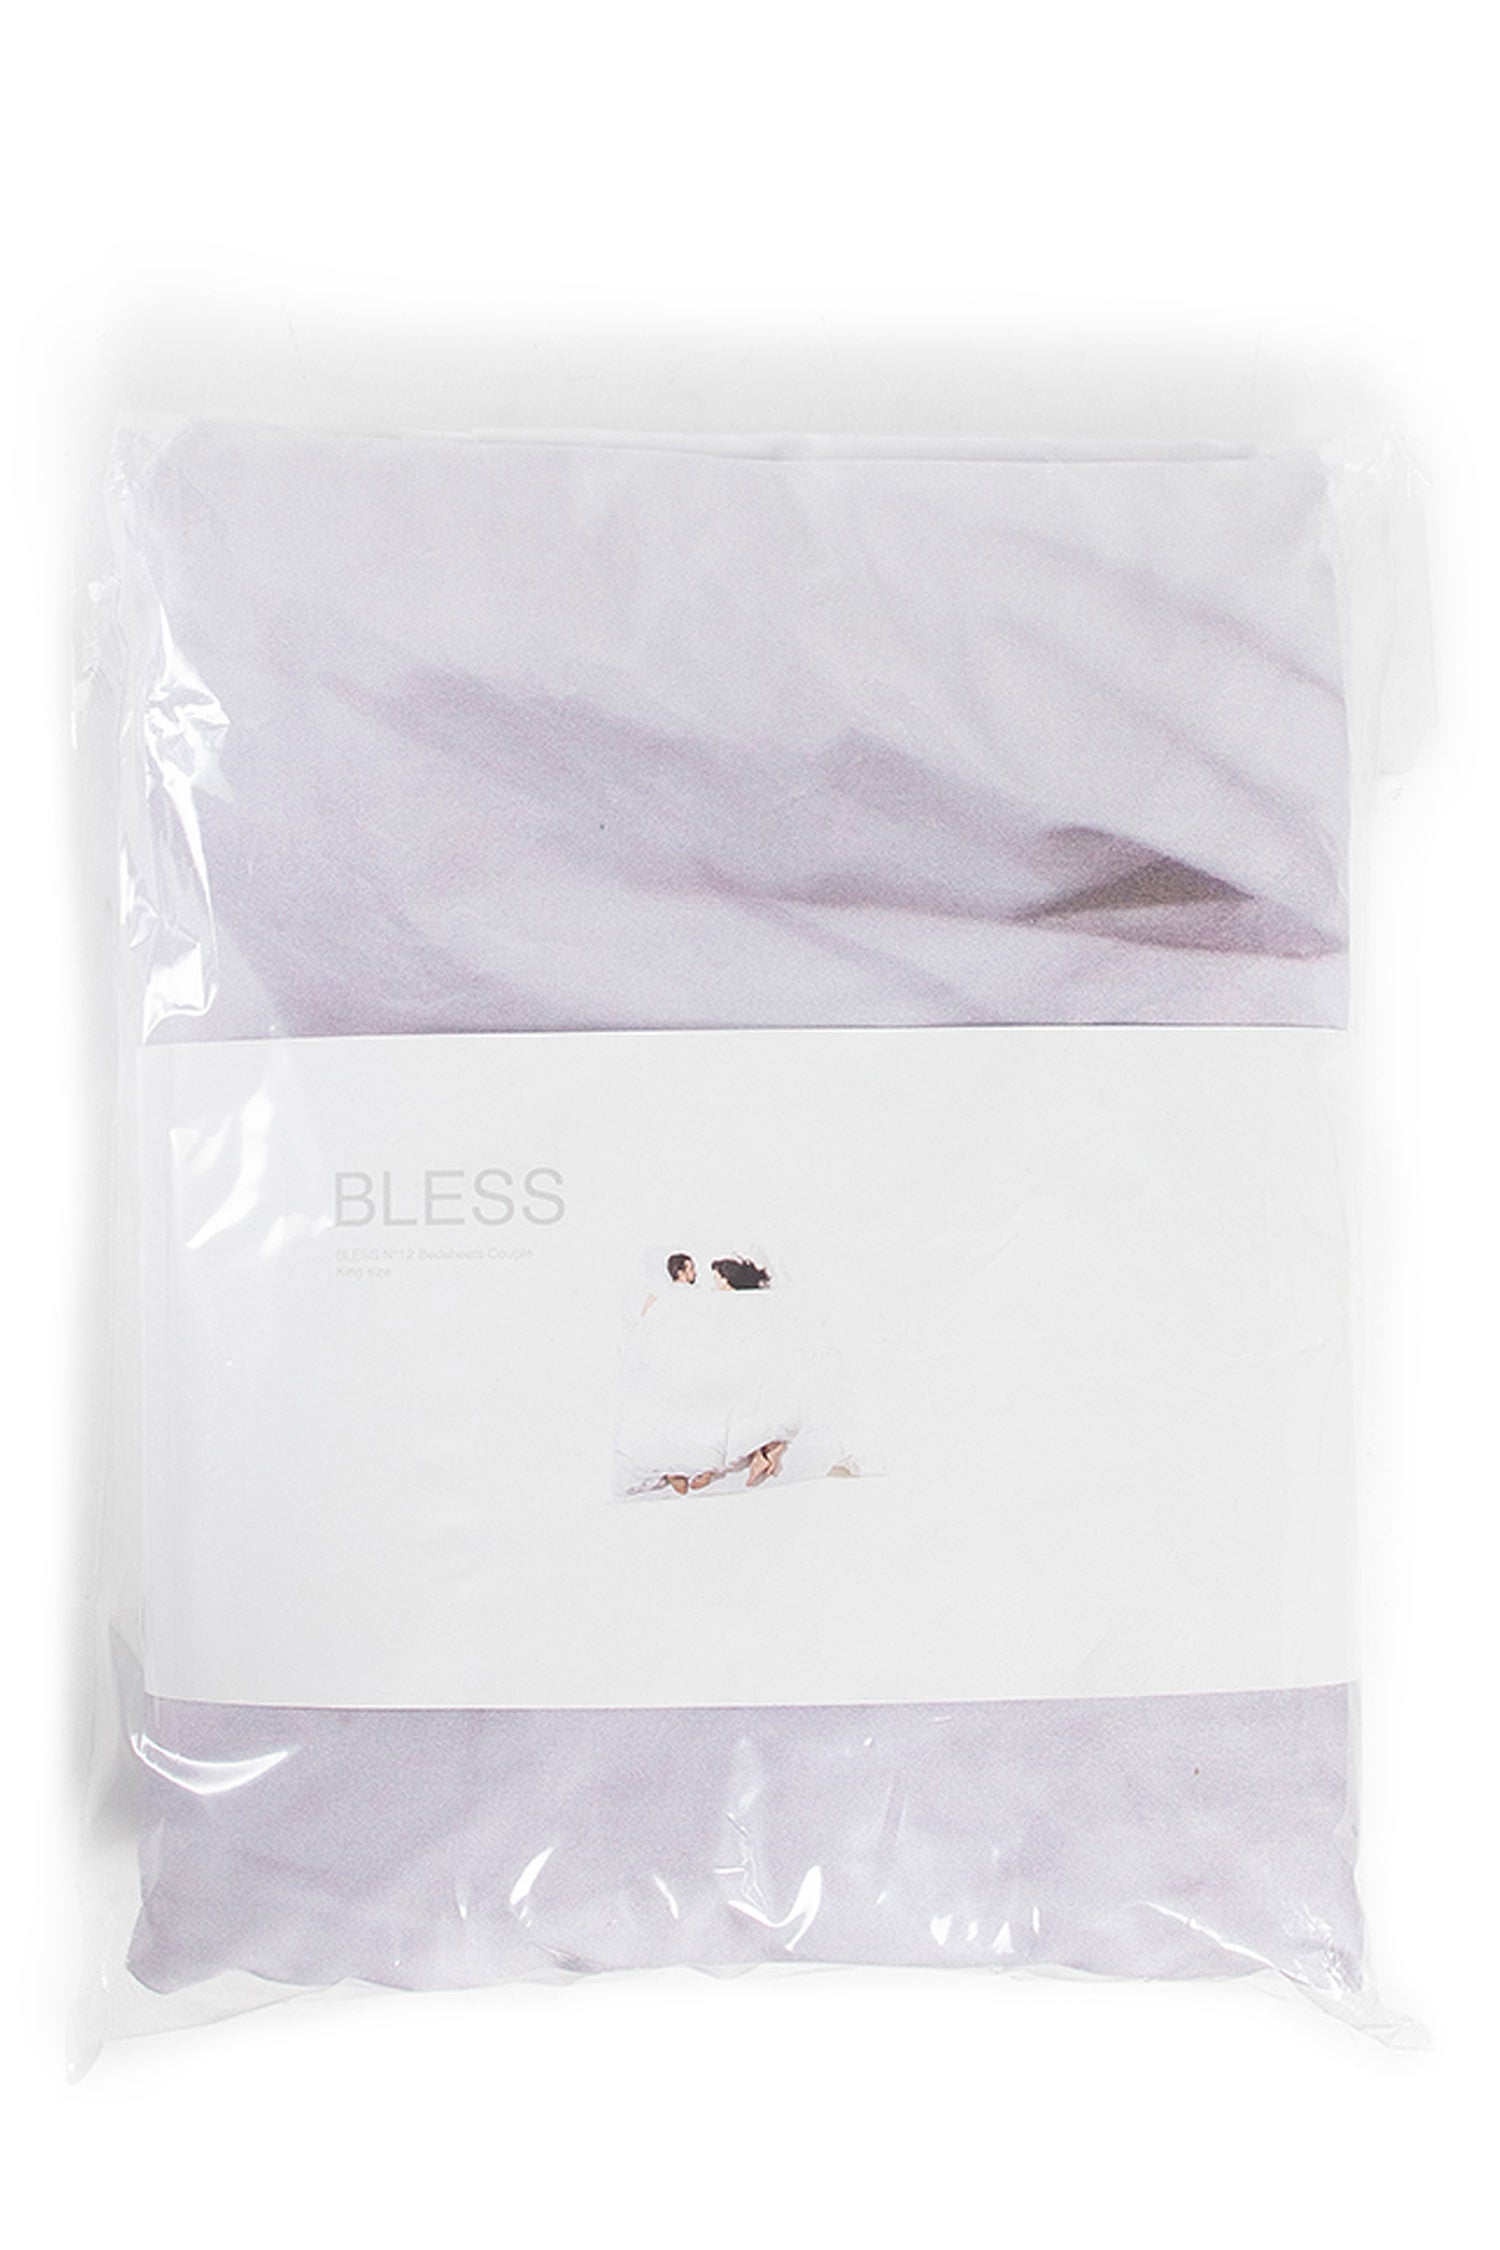 BLESS UNISEX  HOME & LIFESTYLE